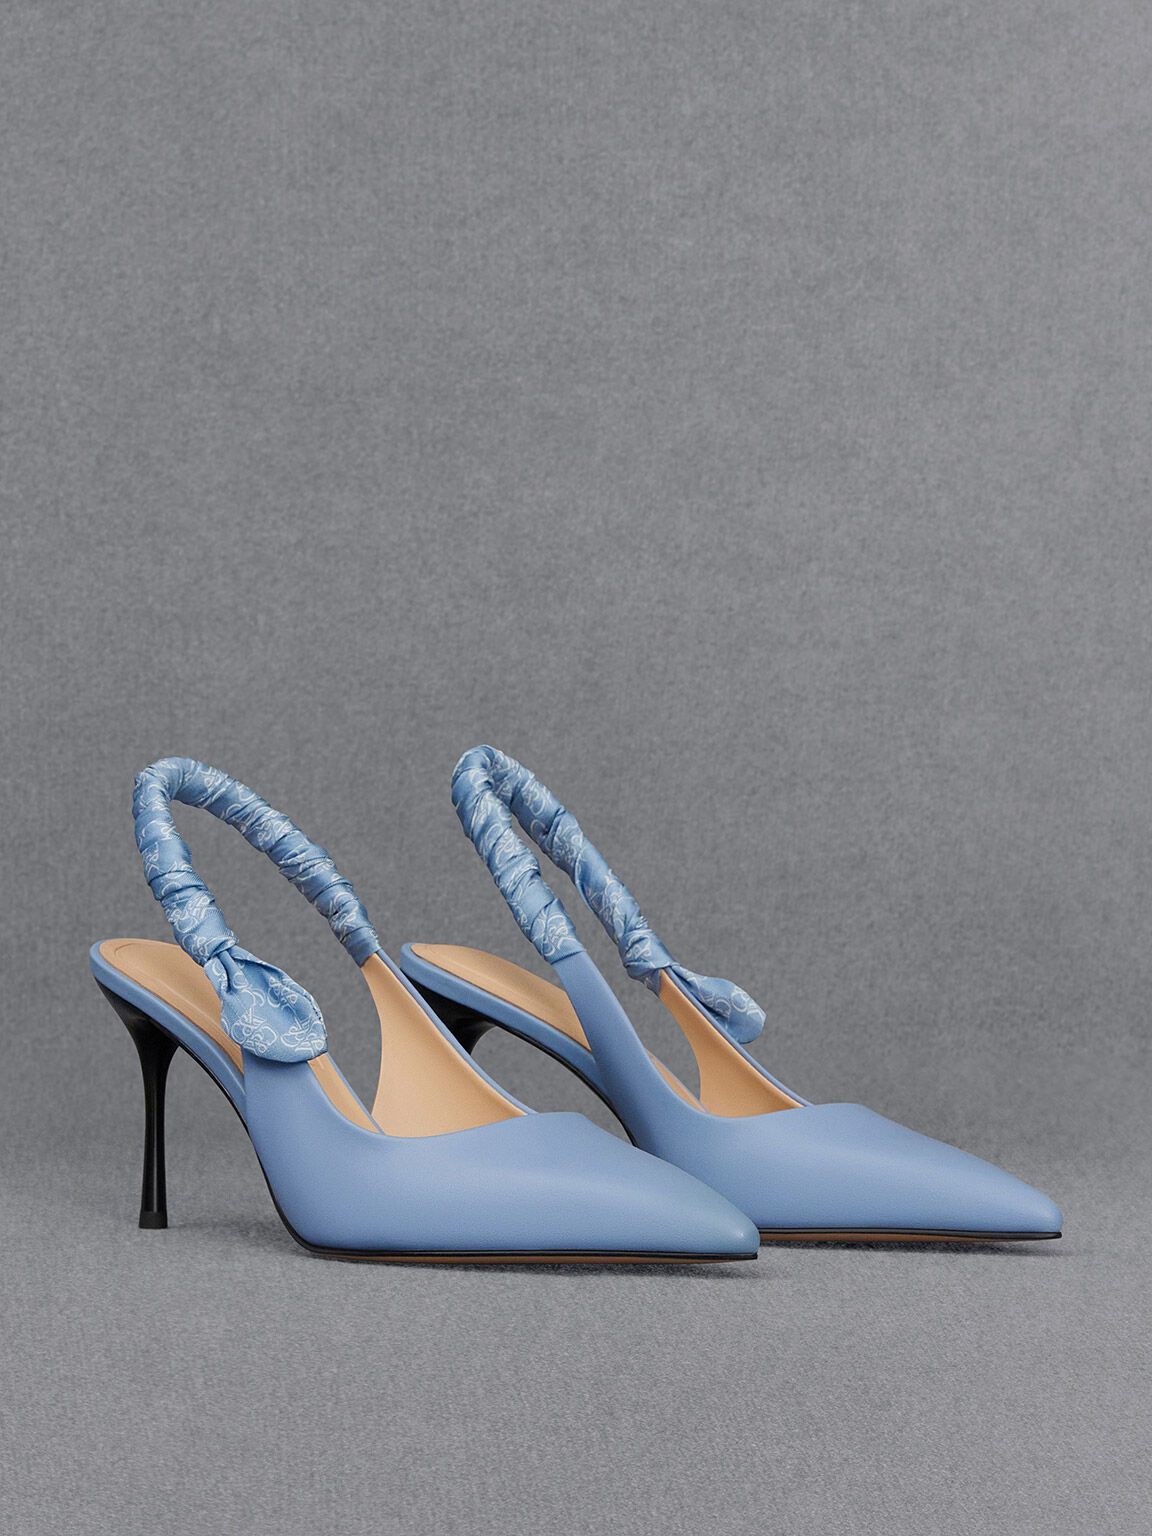 Tully Leather Ruched Print Slingback Pumps, Light Blue, hi-res